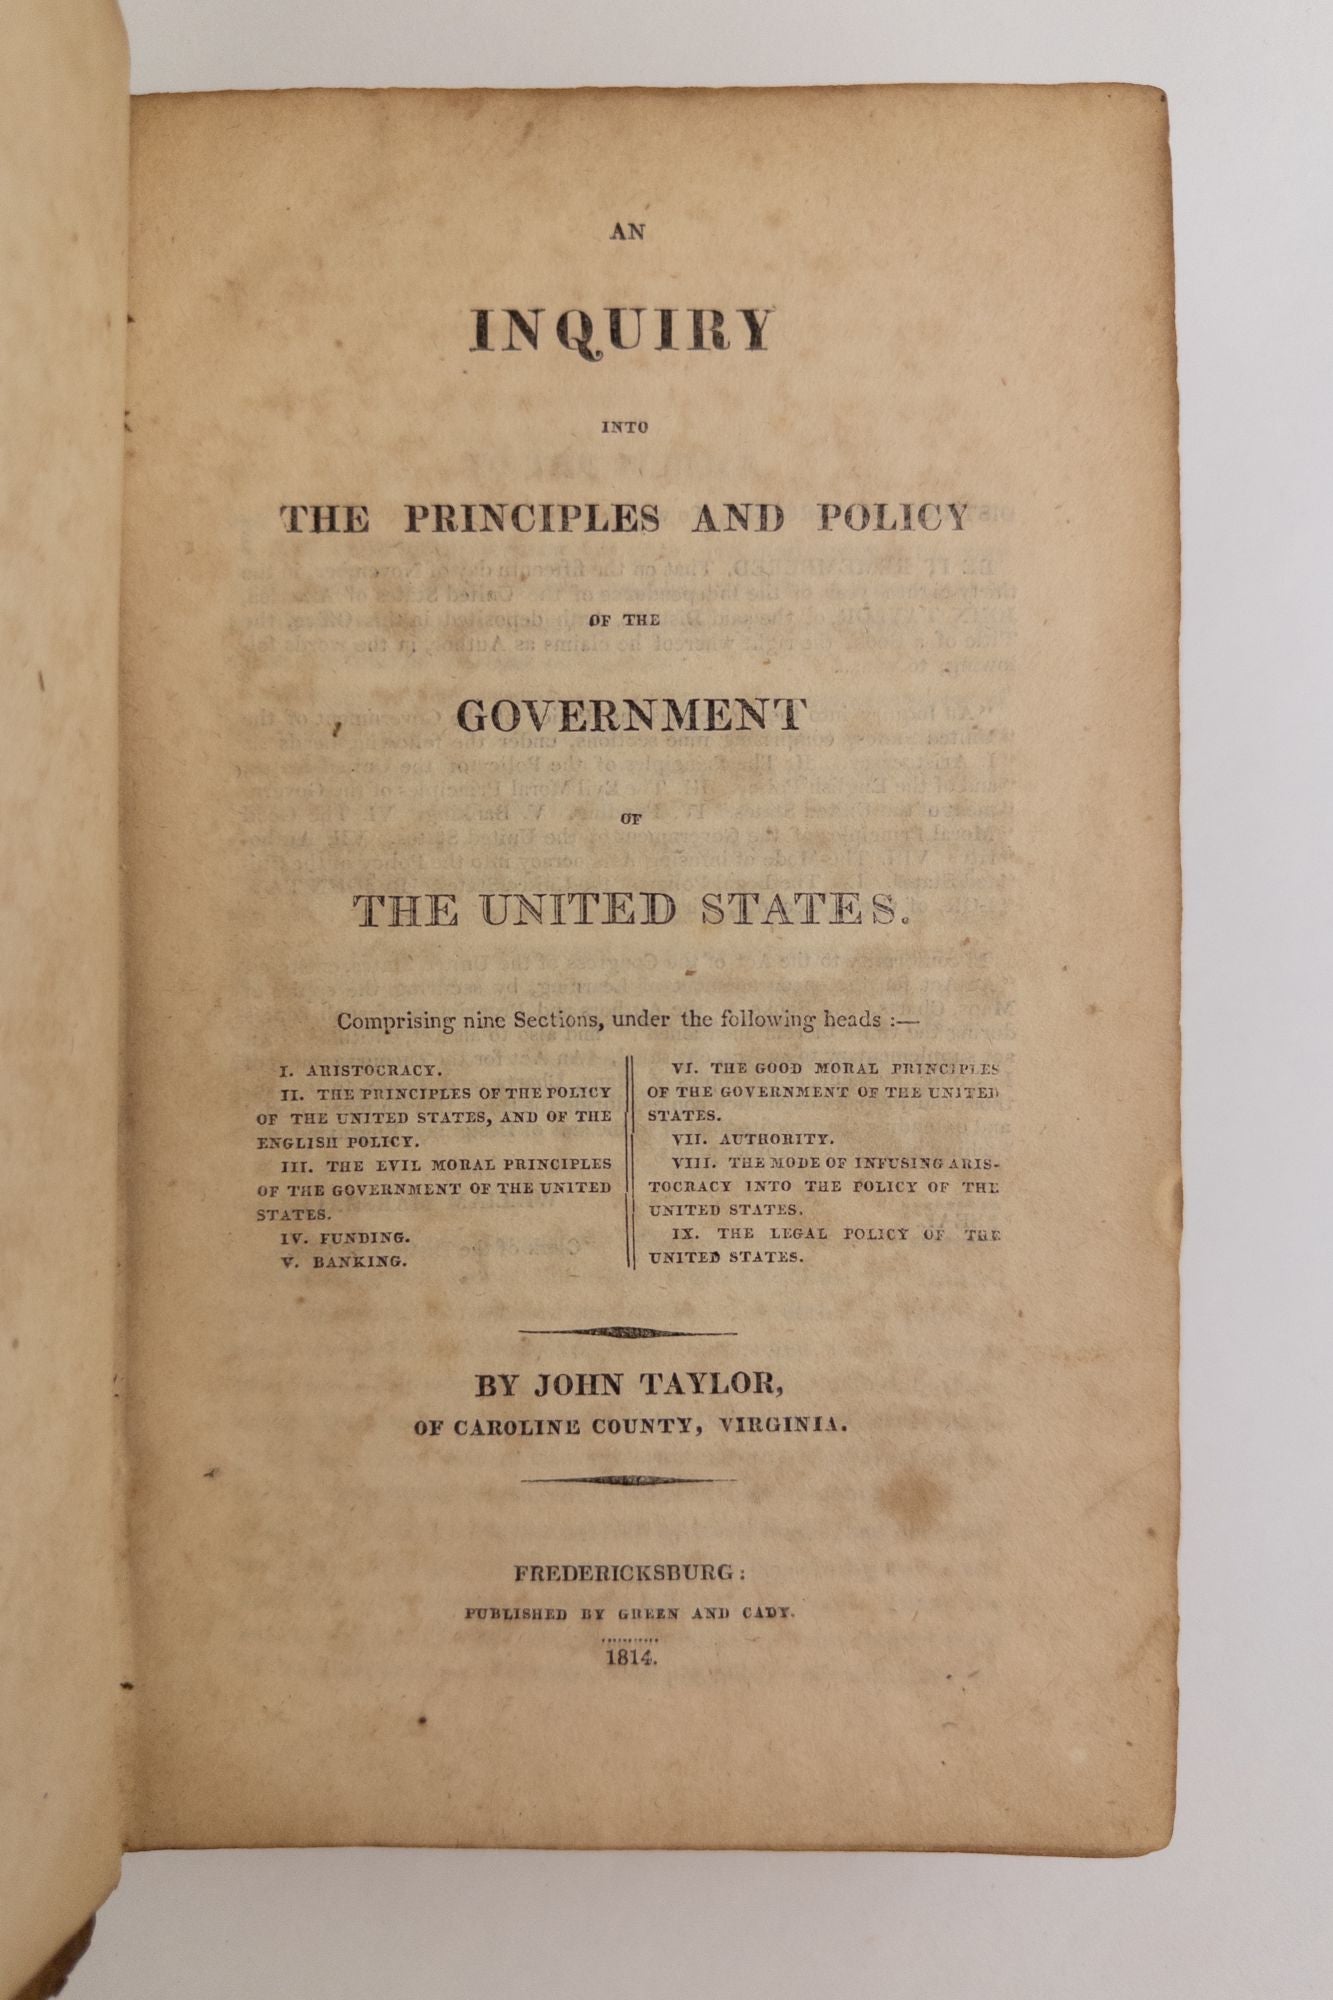 Product Image for AN INQUIRY INTO THE PRINCIPLES AND POLICY OF THE GOVERNMENT OF THE UNITED STATES